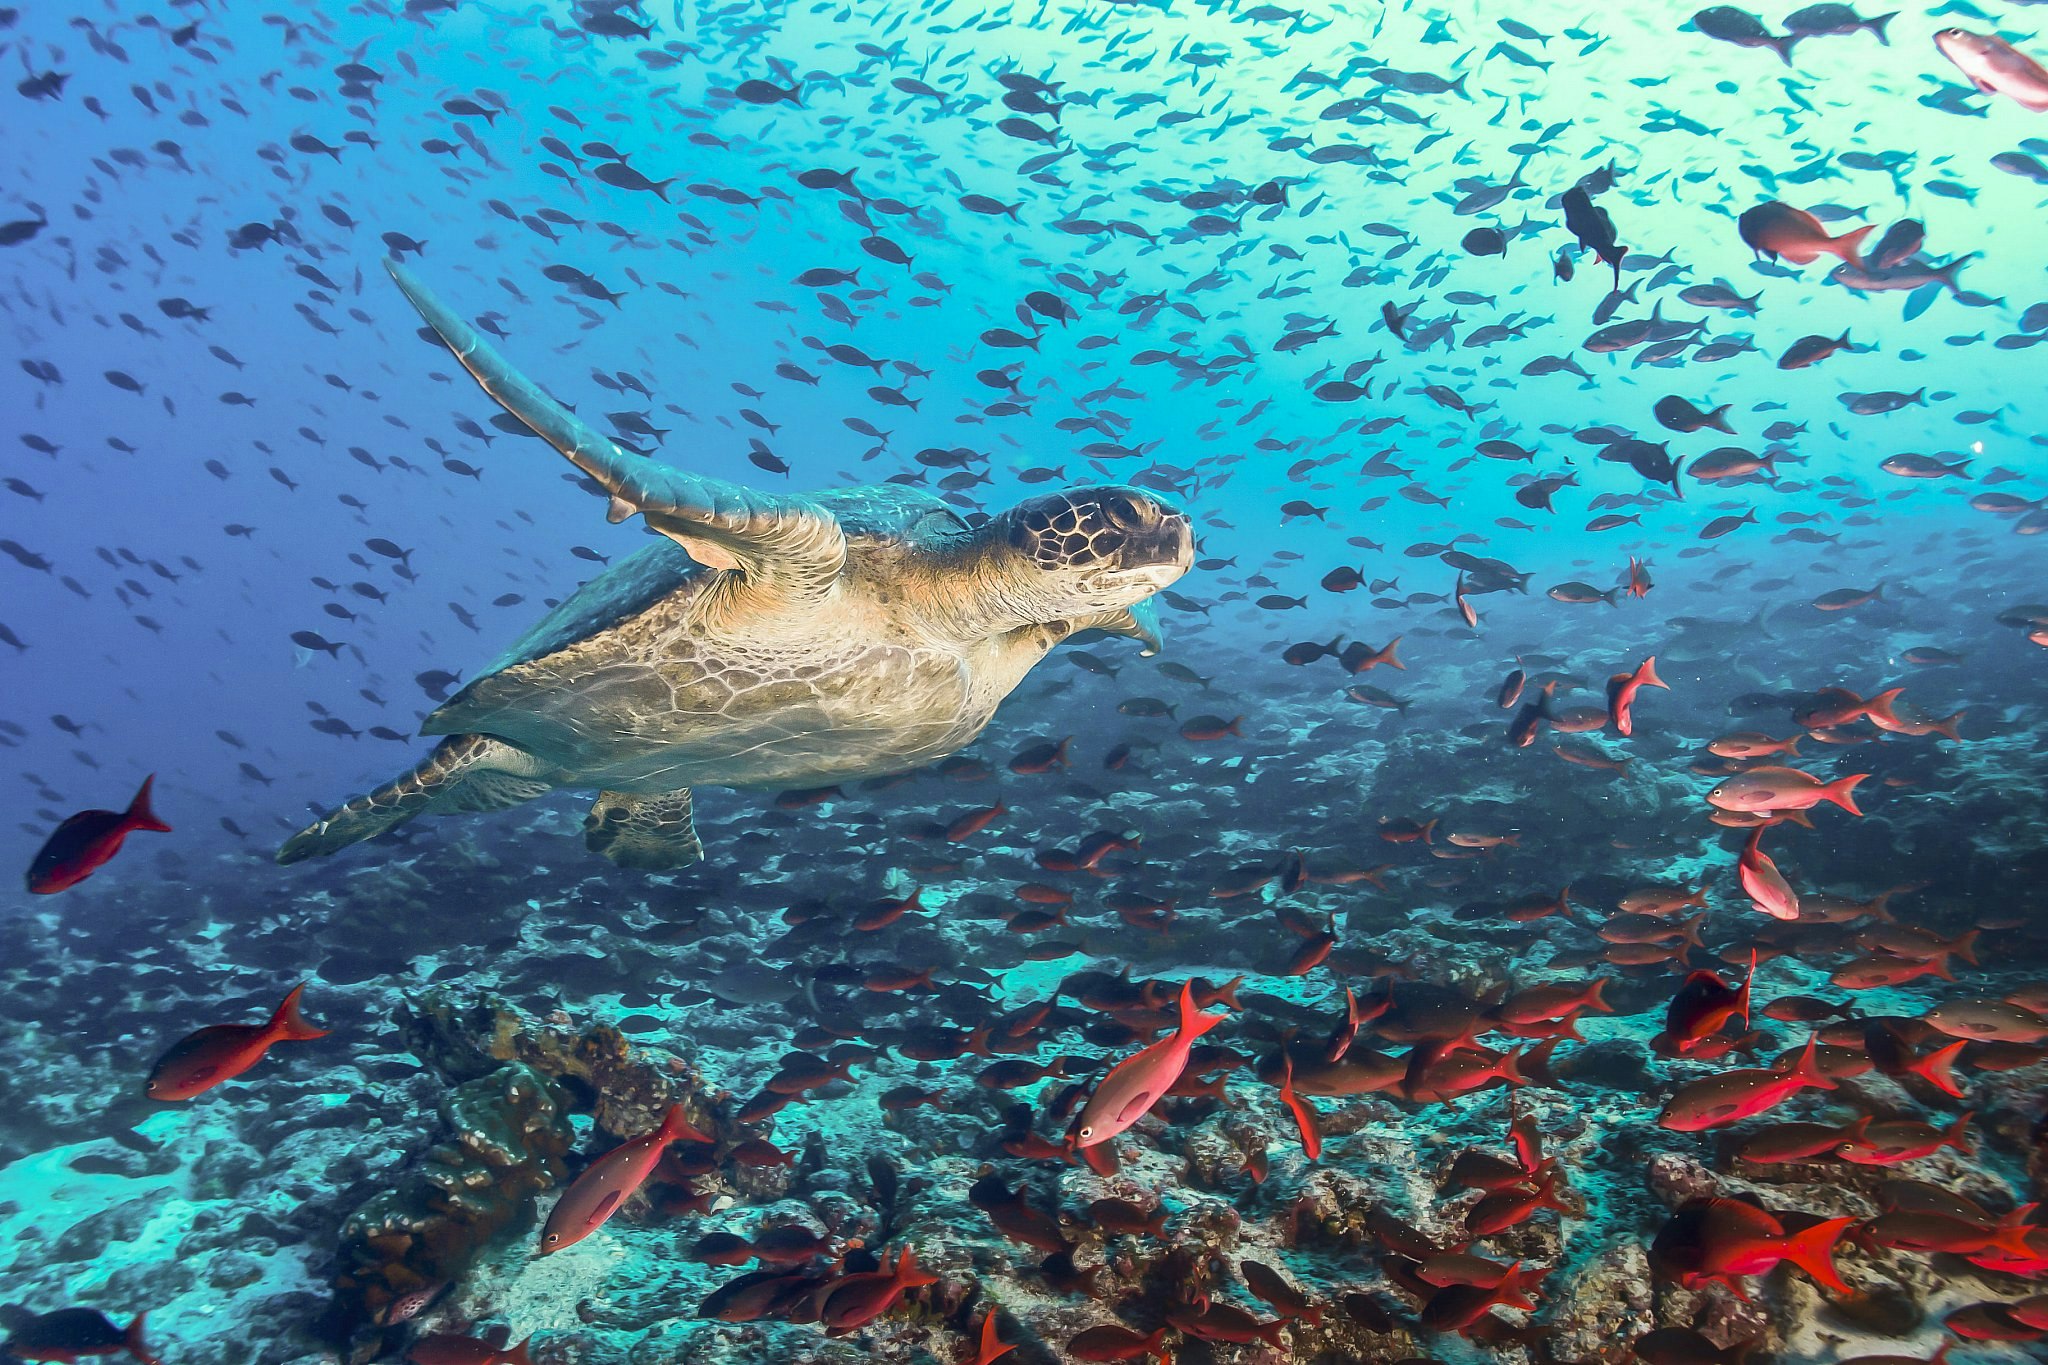 A turtle swimming across a school of red fish in the Galapagos.